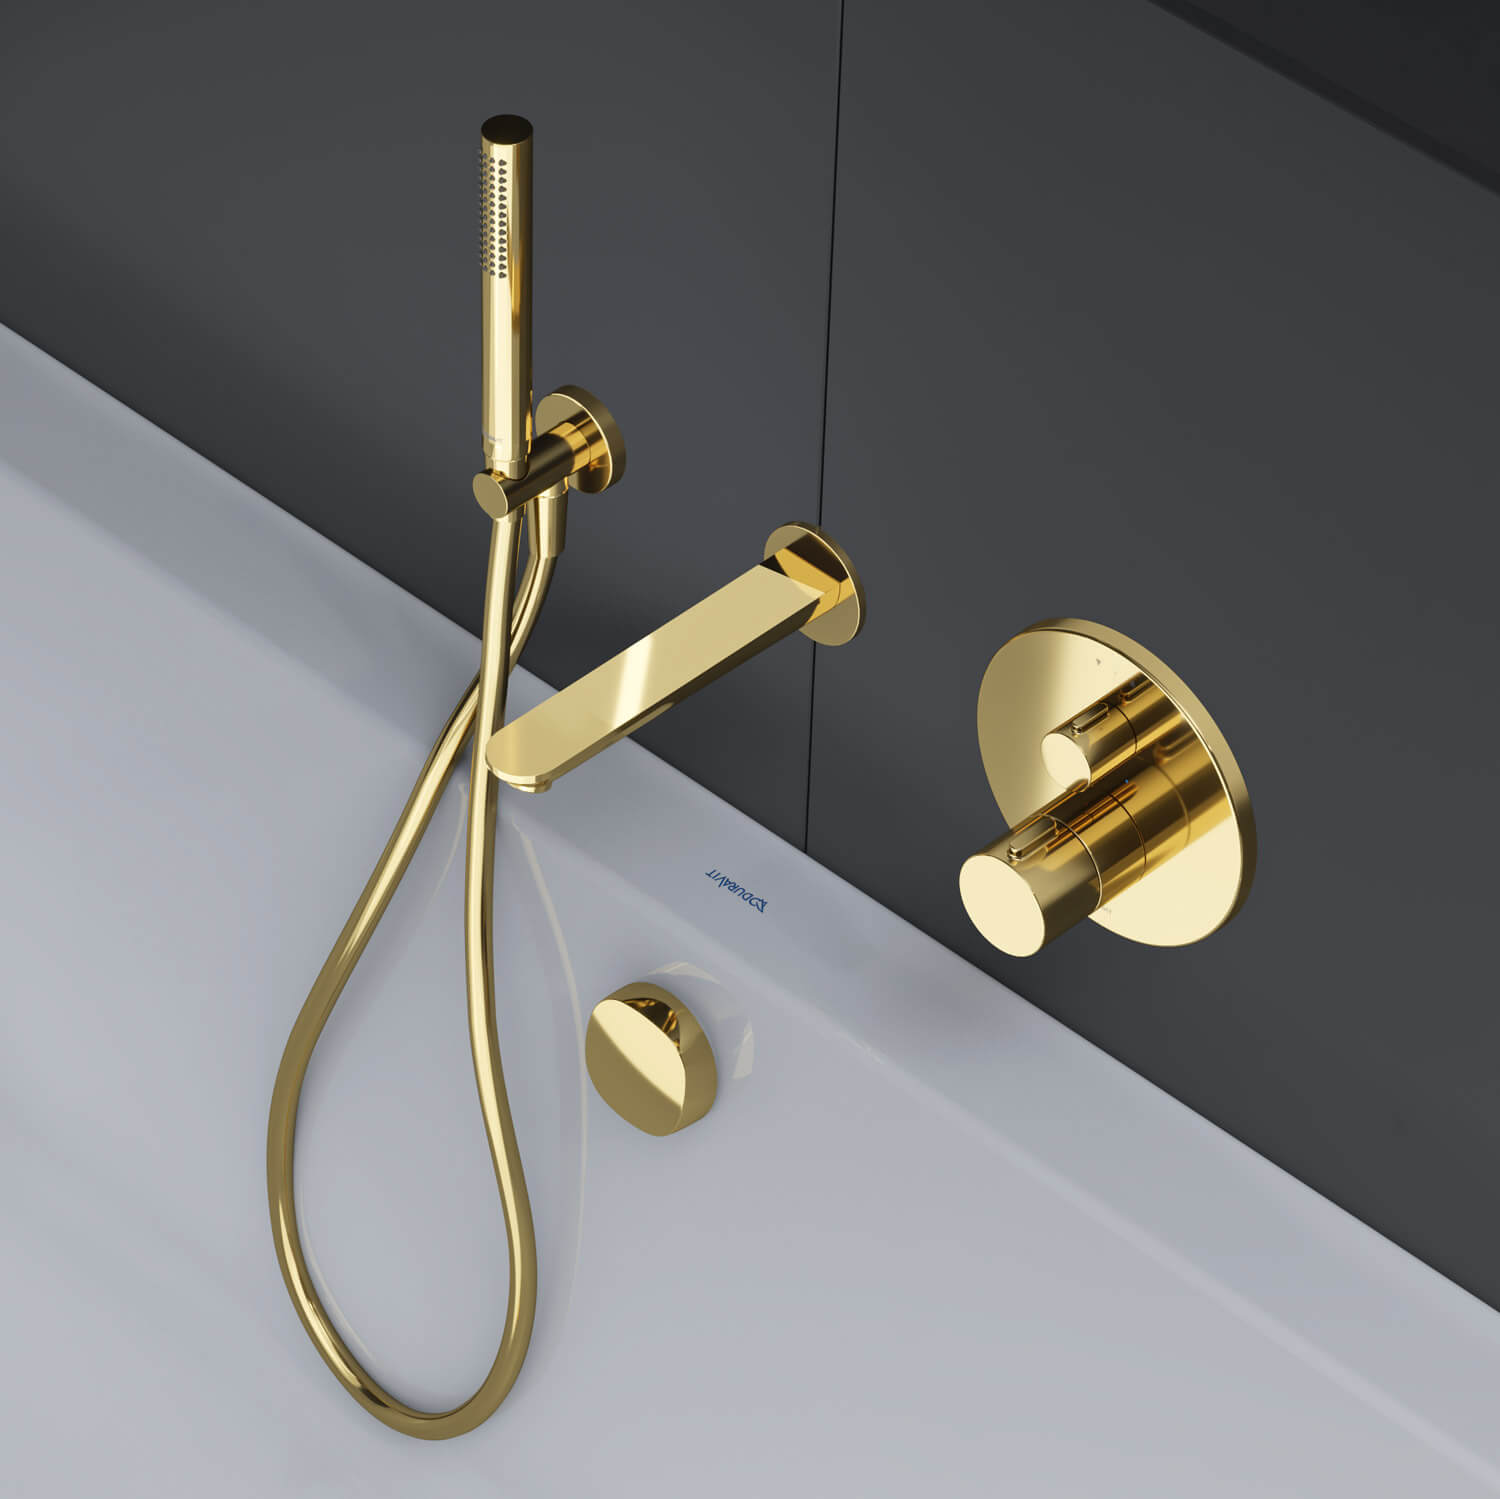 Wave Bath spout in polished gold
